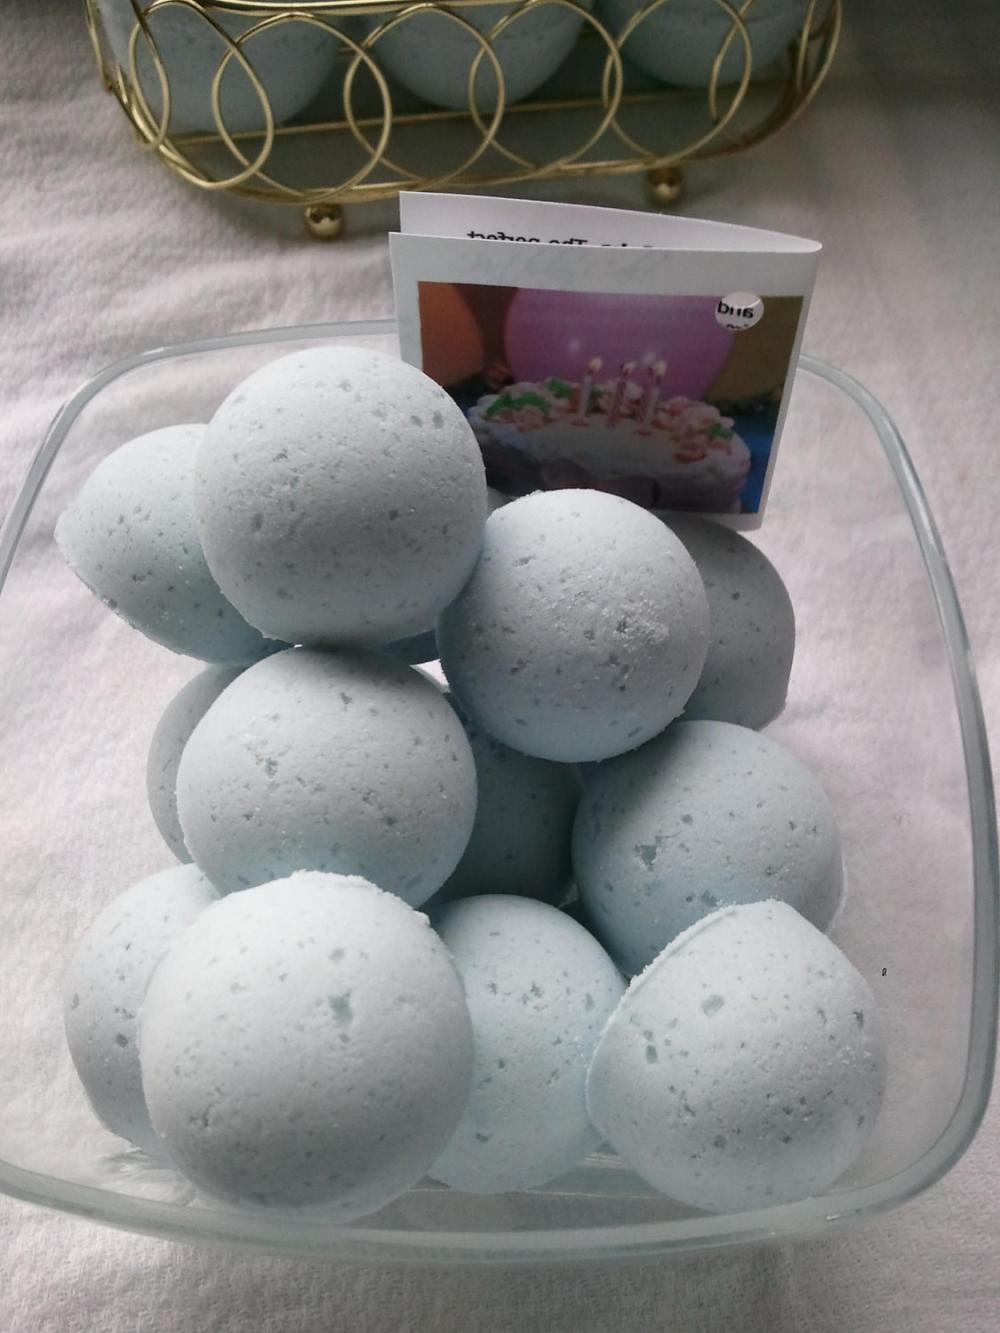 12 Bath Bombs 1 Oz Each (birthday Cake) Gift Bag Bath Fizzies, Great For Dry Skin, Kids And Adults Too